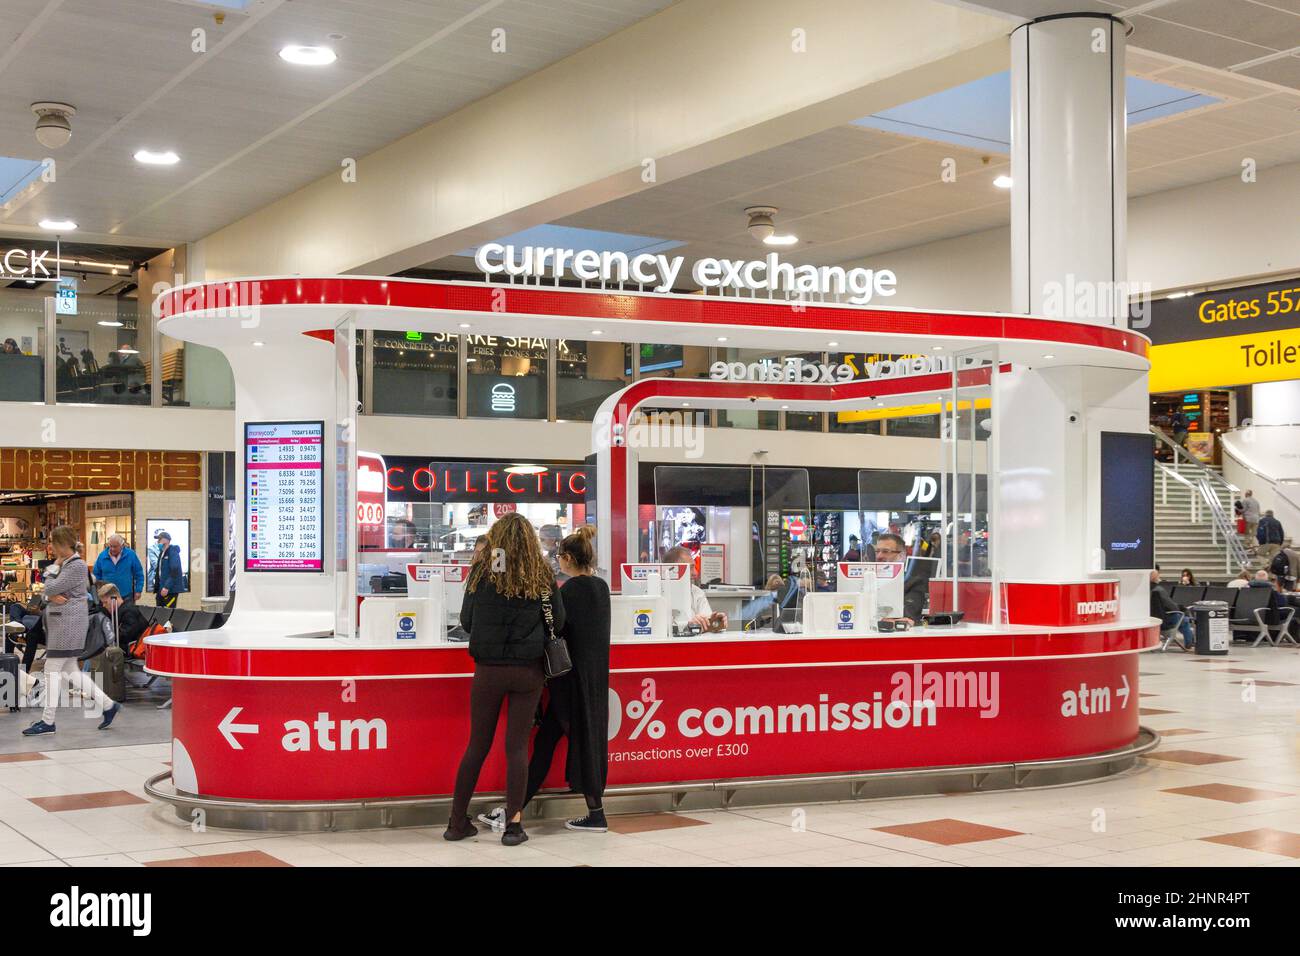 Moneycorp Currency Exchange kiosk in departures, North Terminal, London Gatwick Airport, Crawley, West Sussex, England, United Kingdom Stock Photo